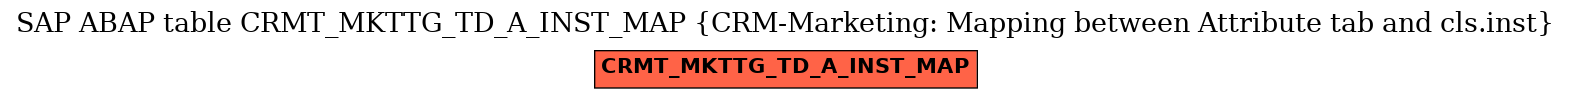 E-R Diagram for table CRMT_MKTTG_TD_A_INST_MAP (CRM-Marketing: Mapping between Attribute tab and cls.inst)